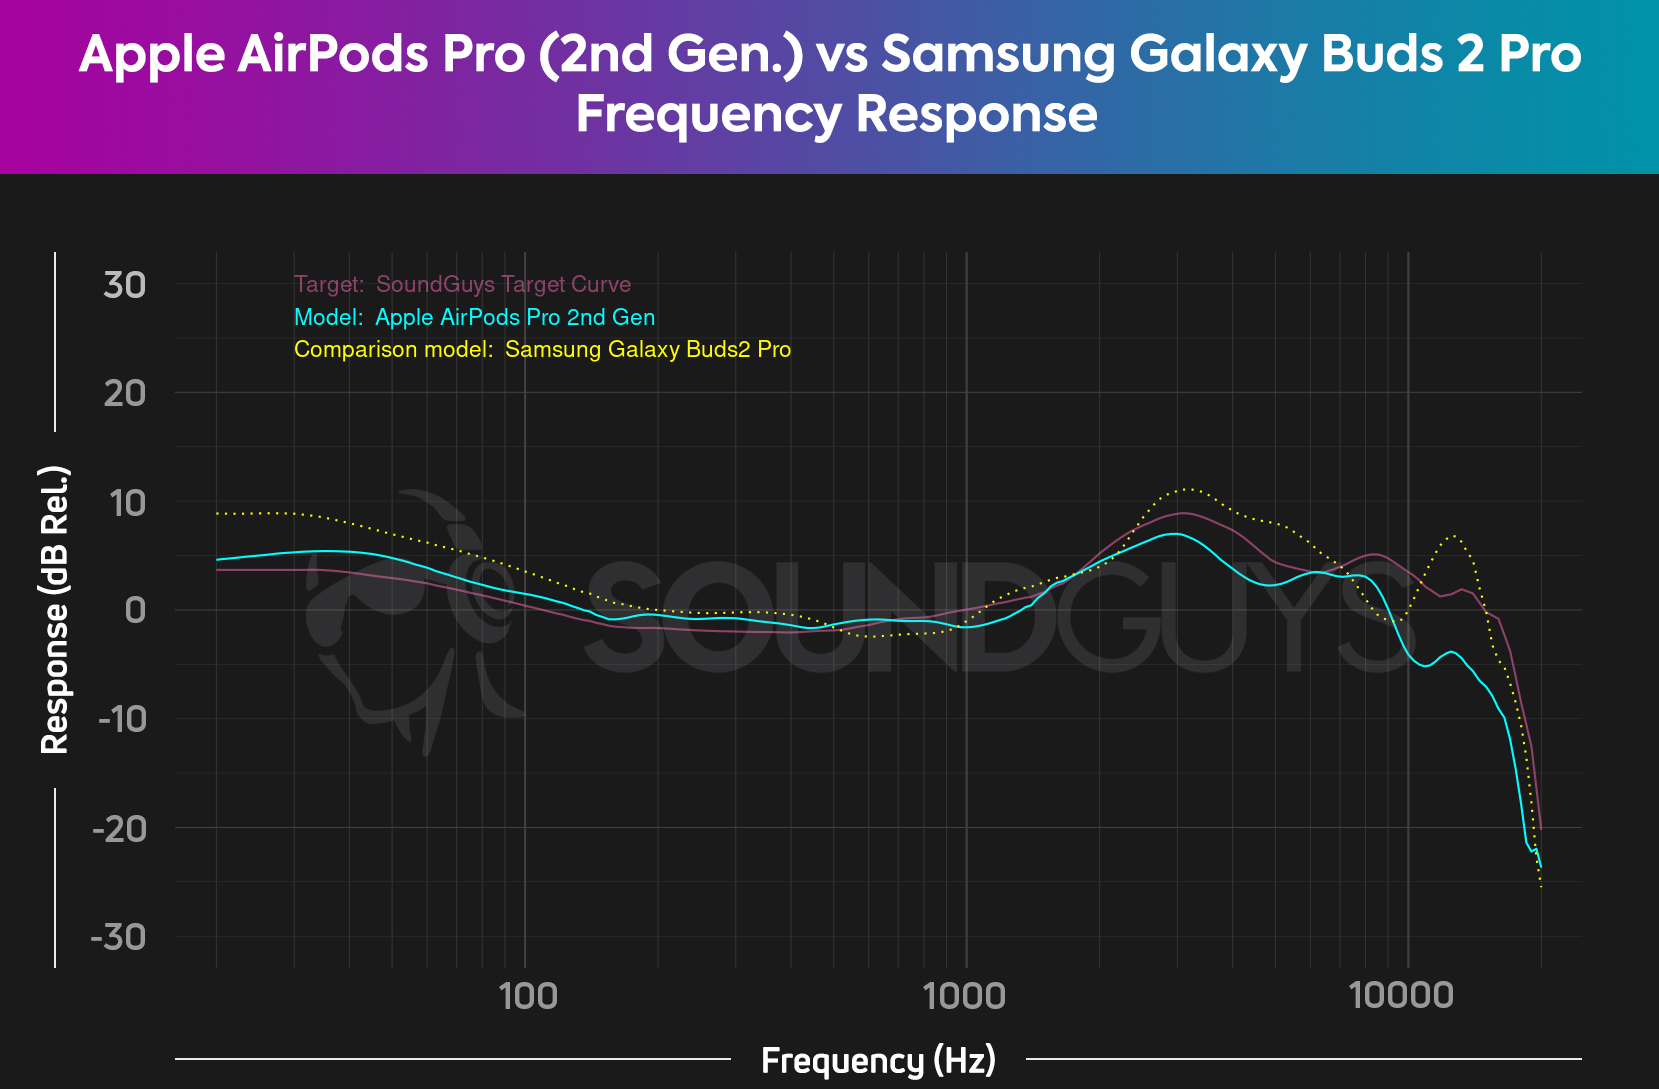 A chart showing Apple AirPods Pro 2nd gen and Samsung Galaxy Buds 2 Pro frequency response